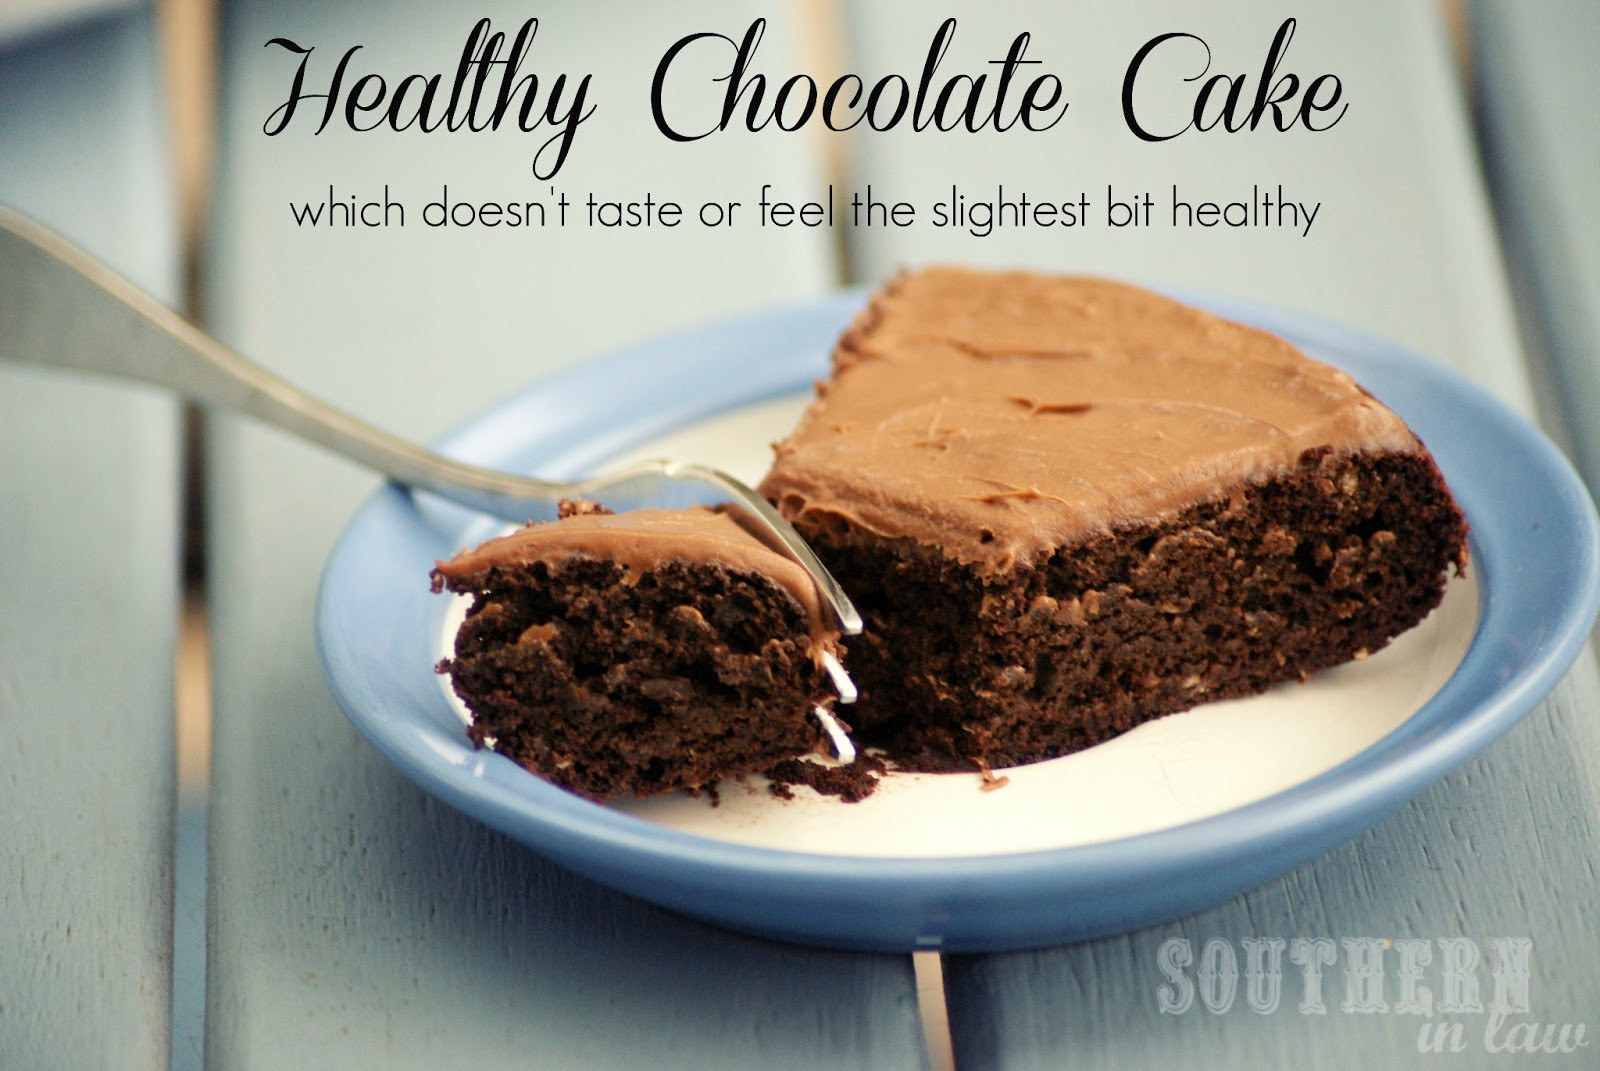 Low Calorie Chocolate Cake
 Southern In Law Recipe Healthy Chocolate Cake Vegan too